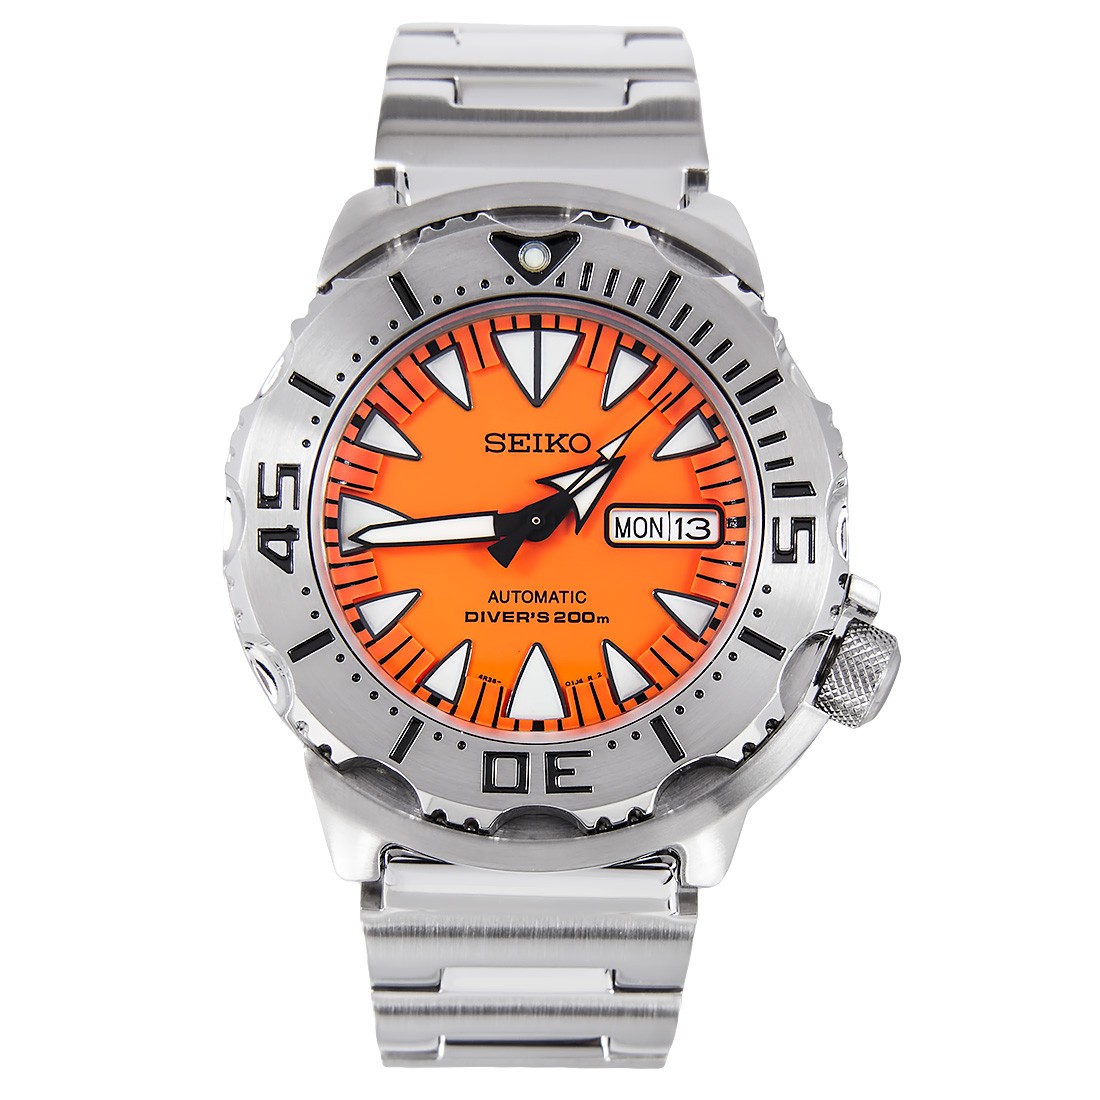 Seiko Orange Monster Men's Automatic Diving Watch SRP309 Review - The Watch  Blog